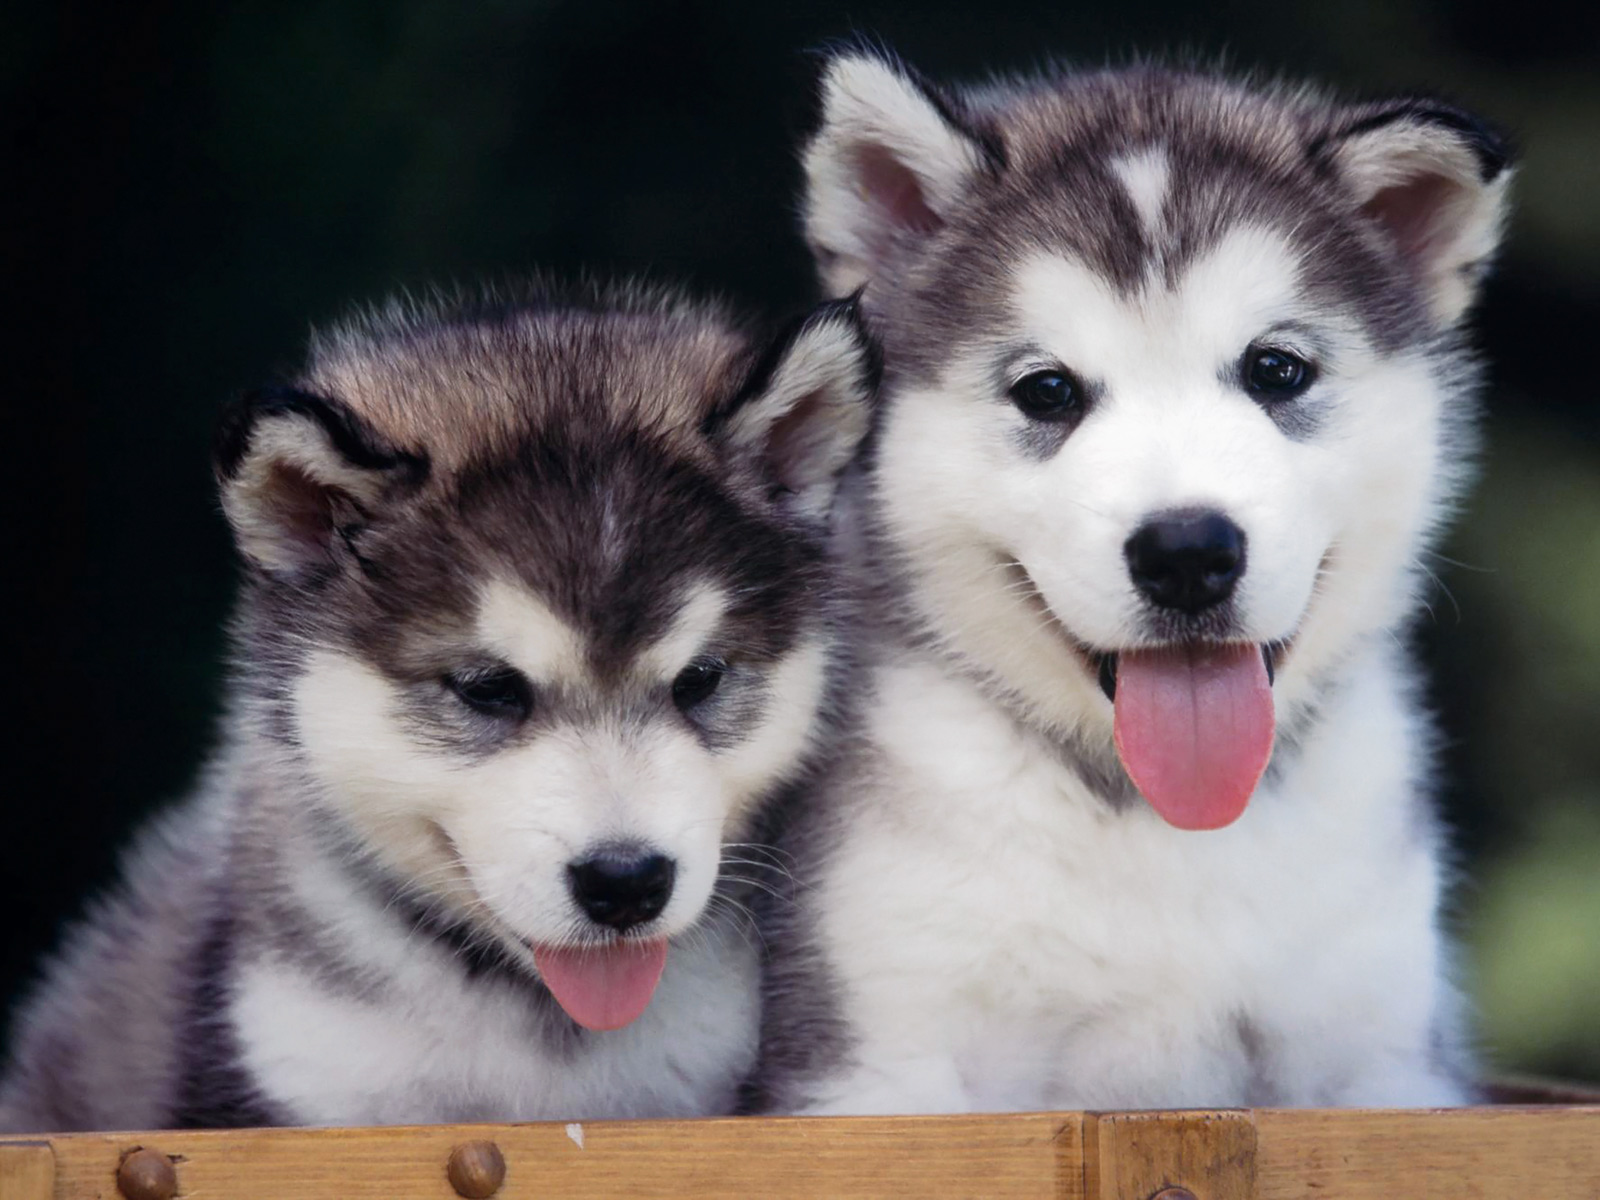  puppies photo and wallpaper Beautiful Siberian Husky puppies pictures 1600x1200